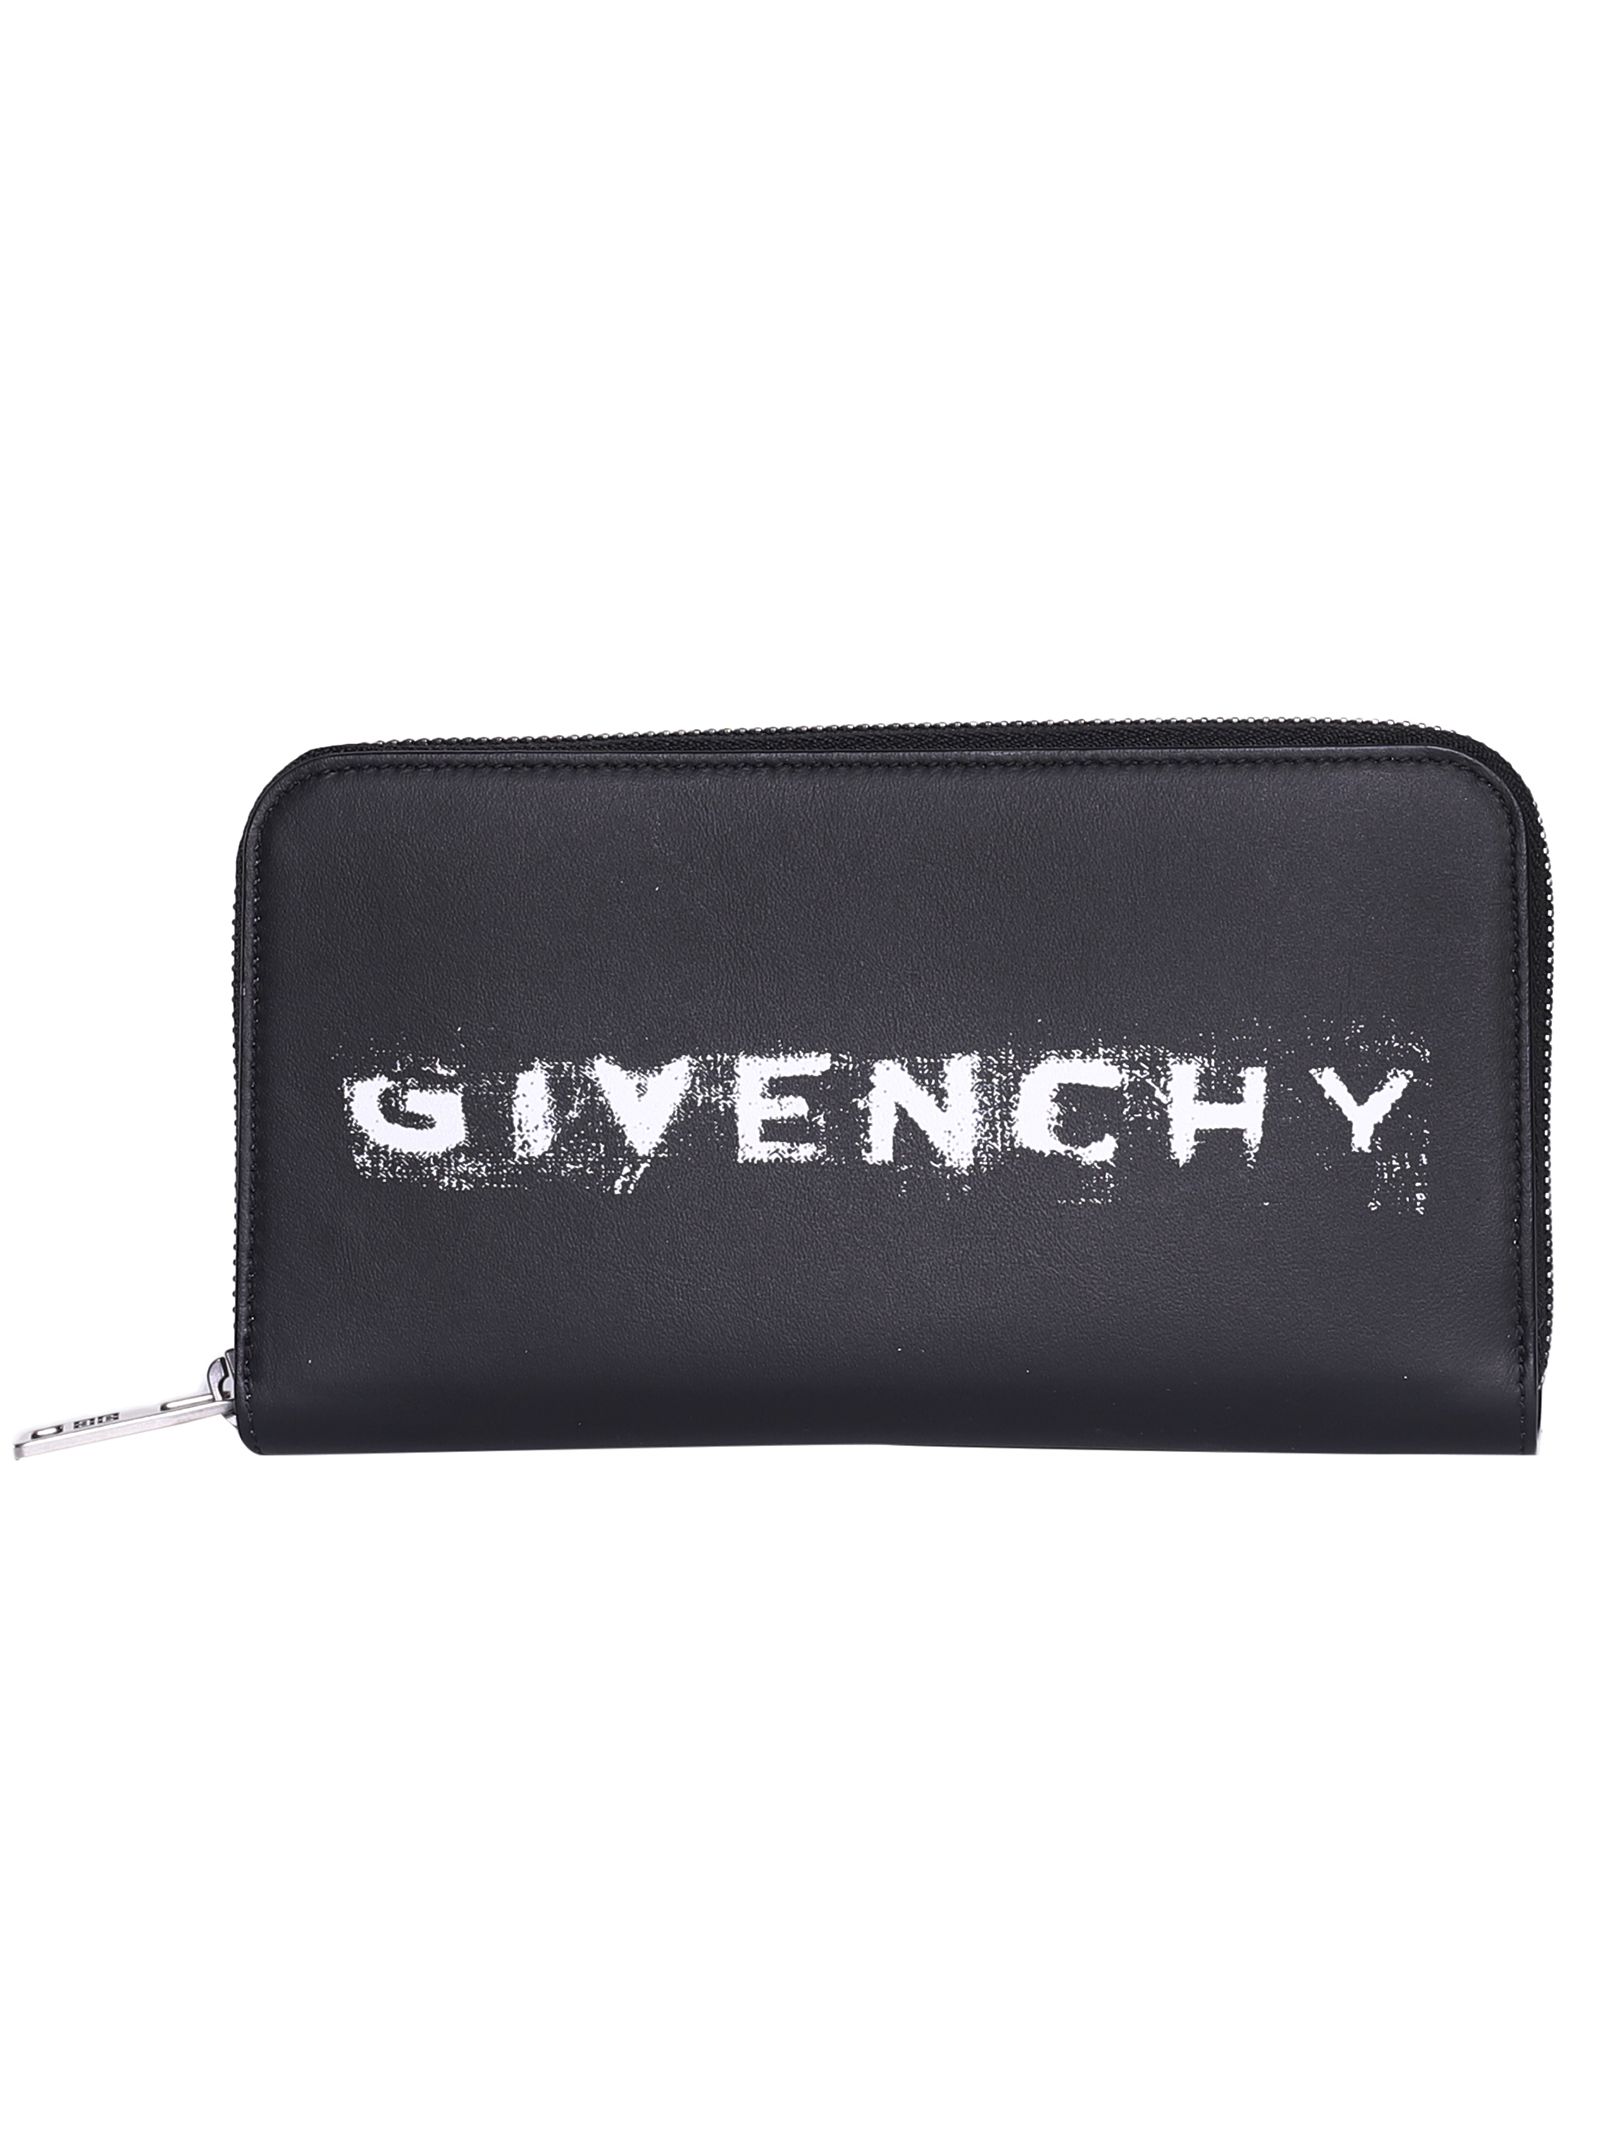 GIVENCHY FADED LOGO PRINT ZIP AROUND WALLET,10930452